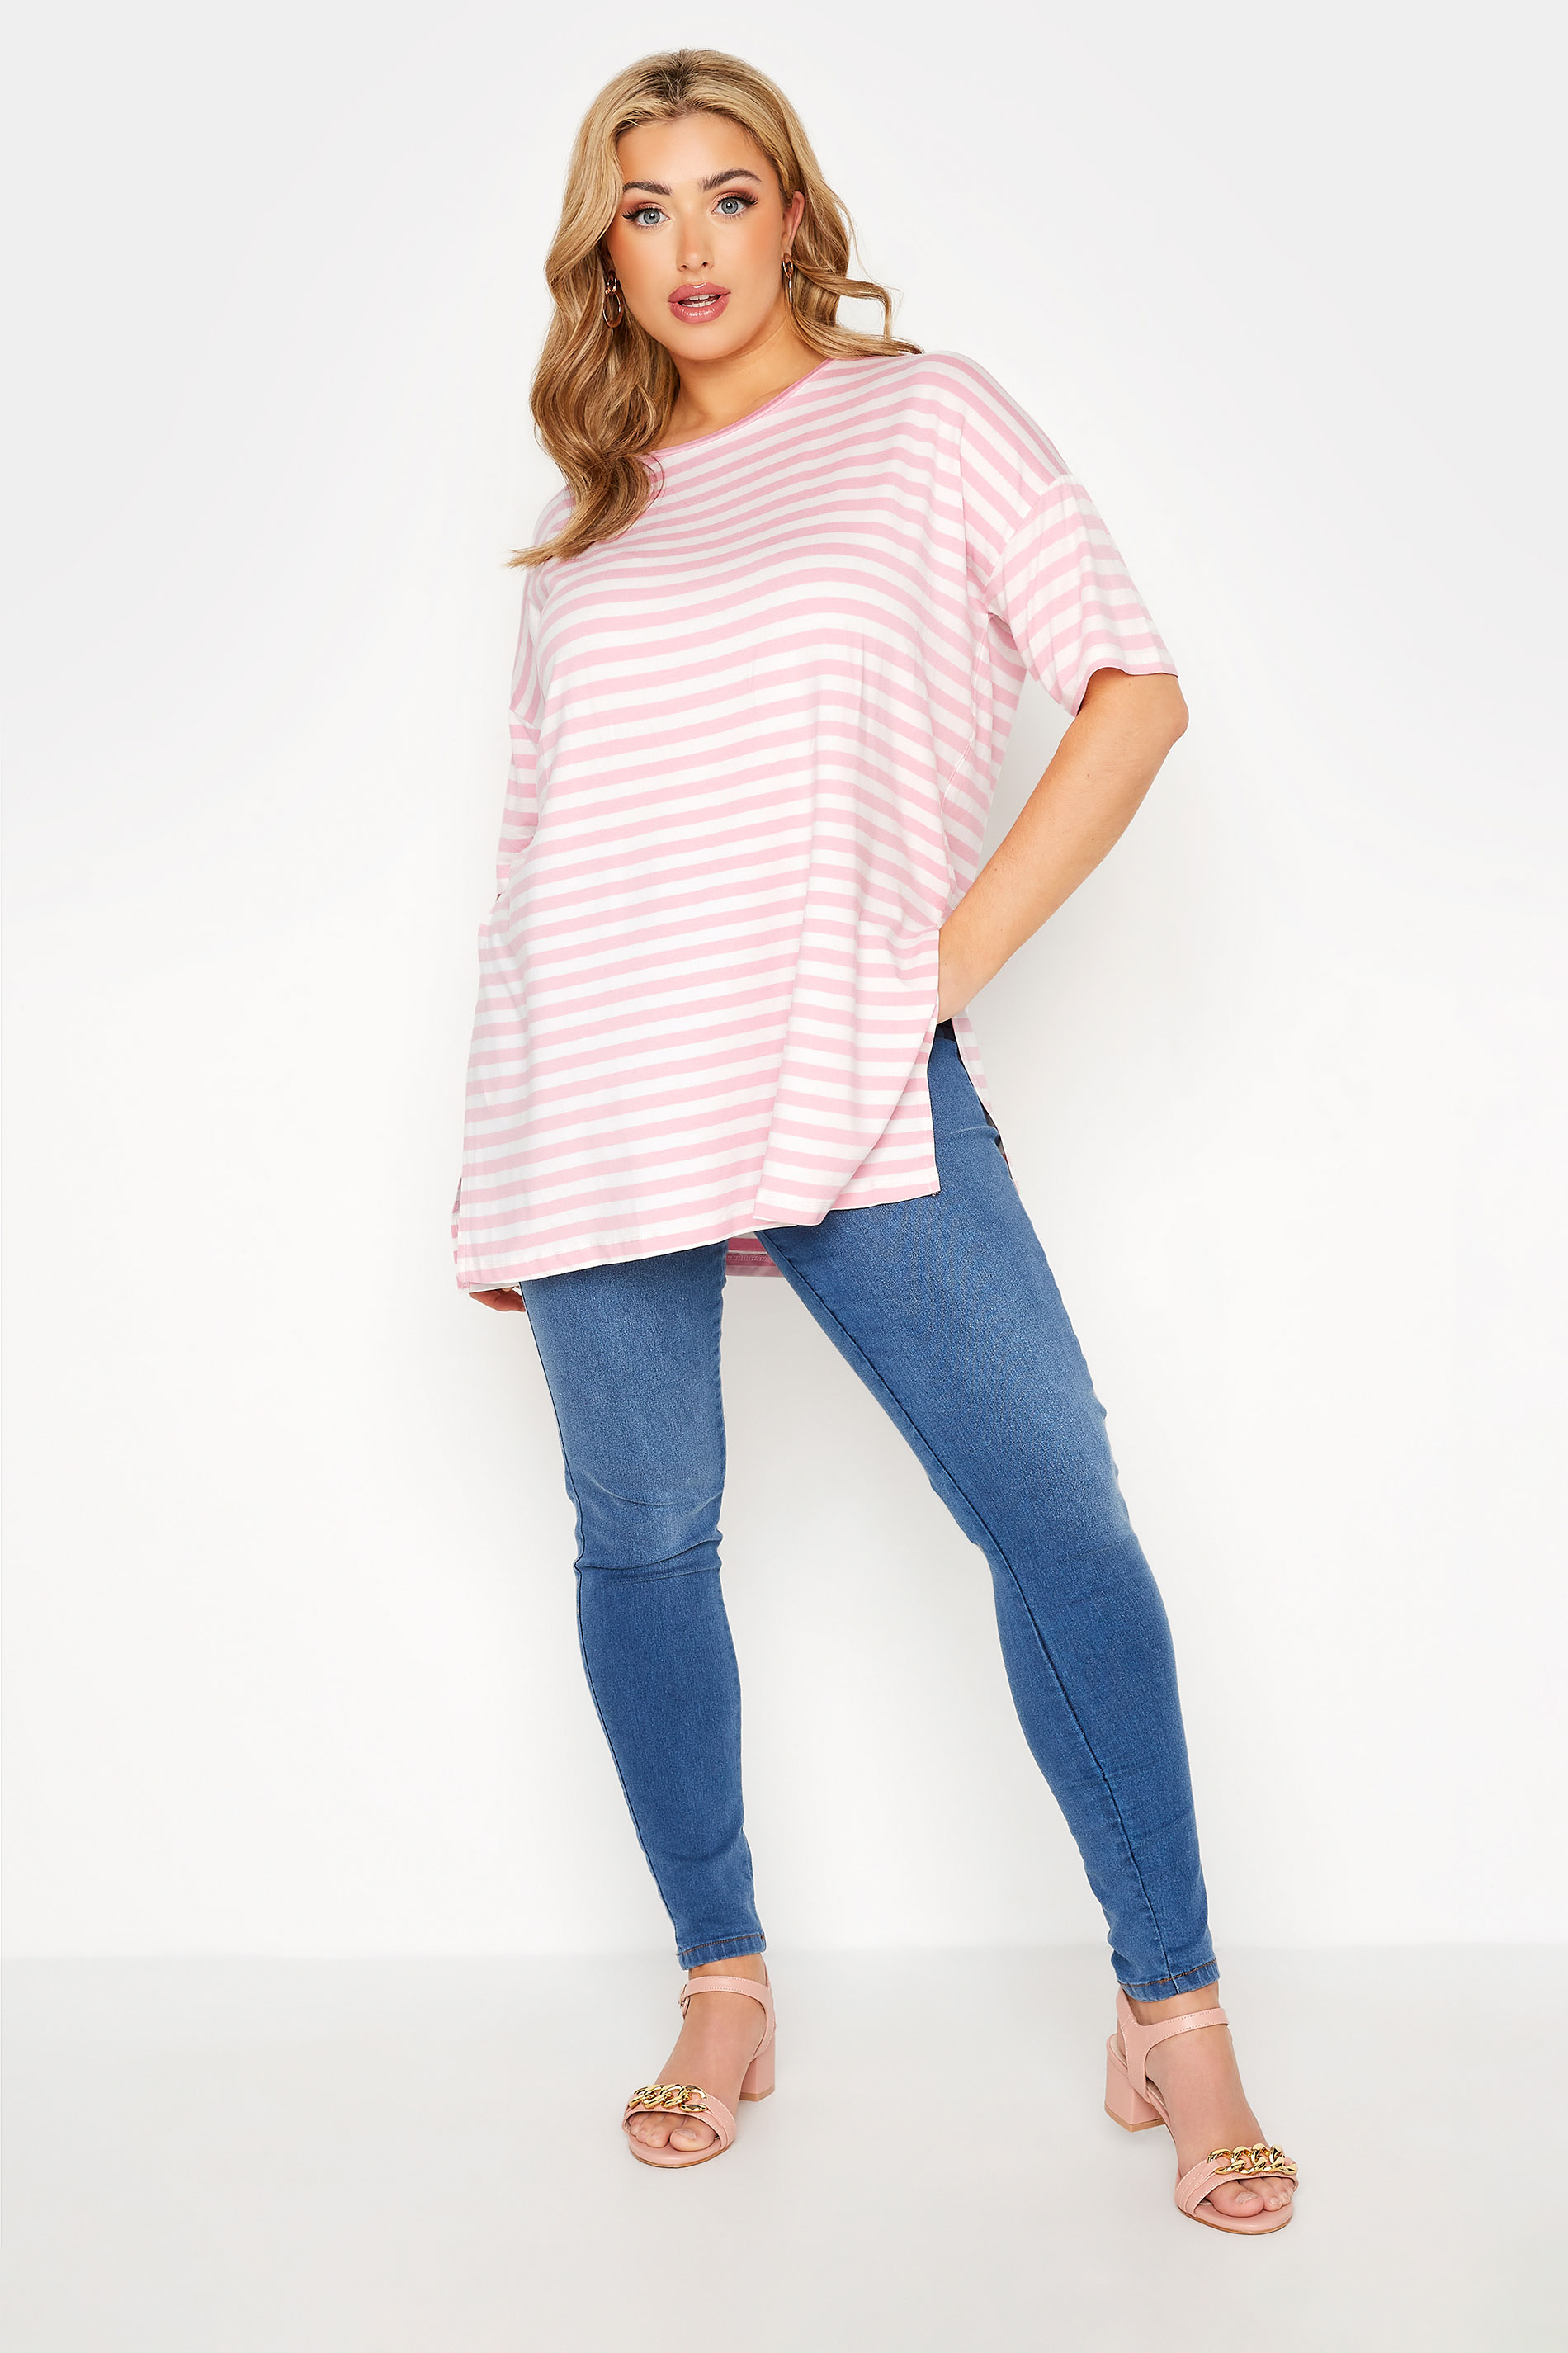 Grande taille  Tops Grande taille  Tops Casual | T-Shirt Rose Imprimé Rayures - FZ73375